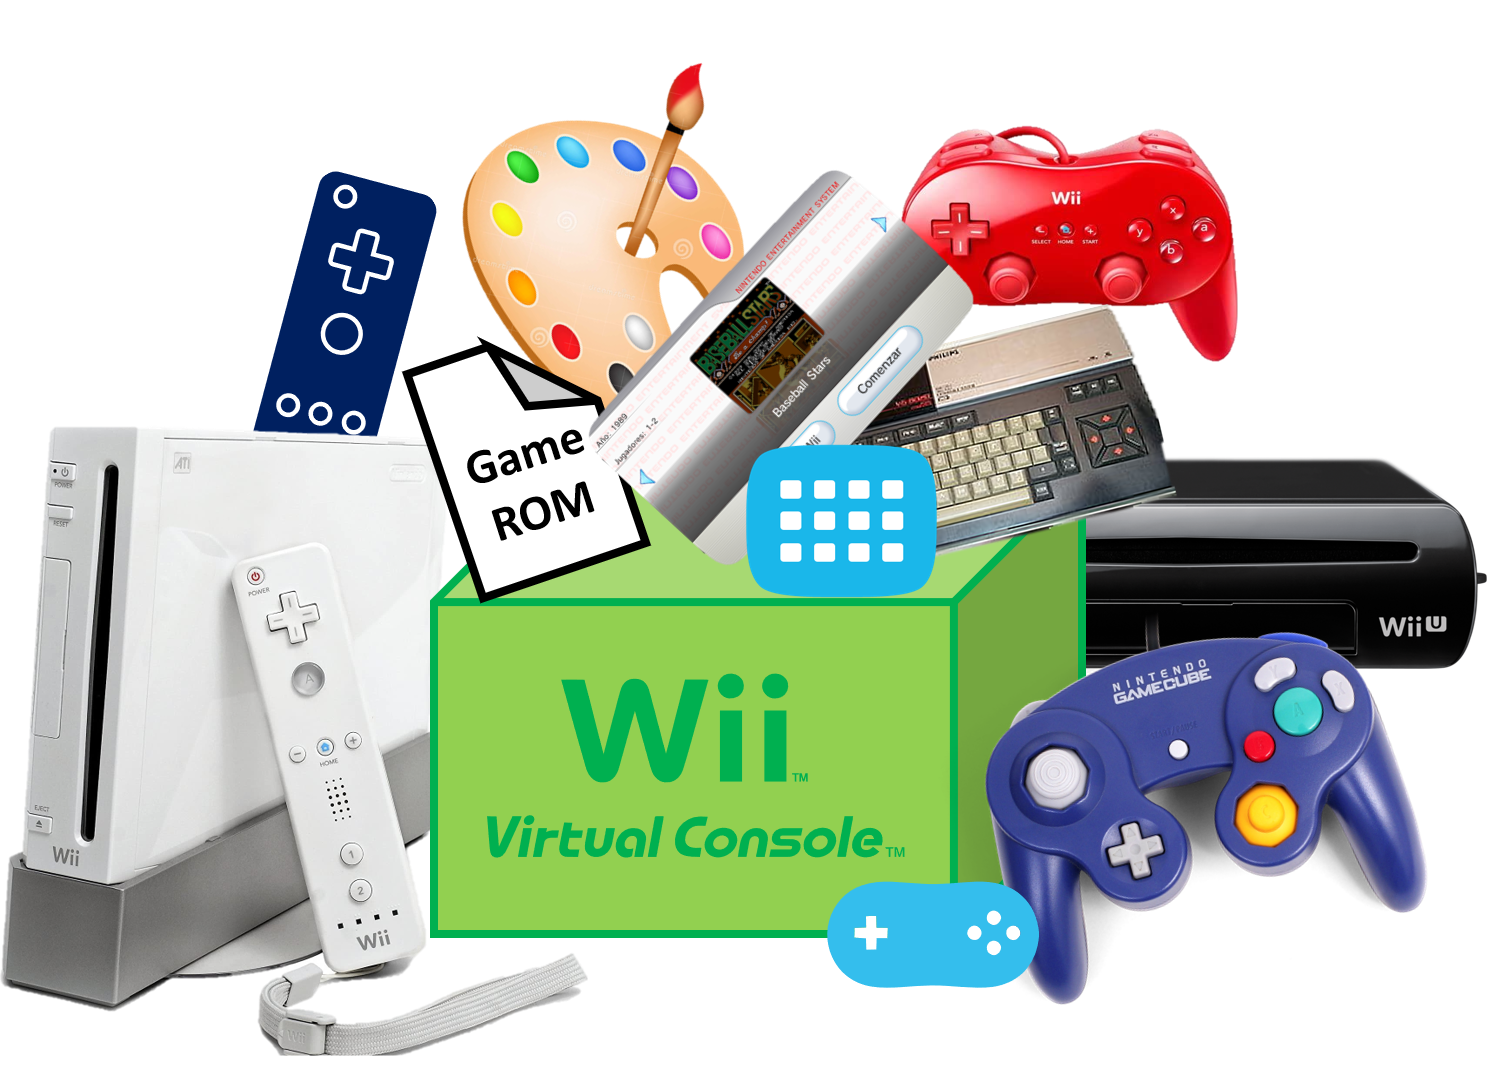 hoofdonderwijzer onderschrift Vervormen RELEASE] saulfabreg All-in-One Wii Virtual Console iNJECTiNG Tools (AIO Wii  VC iNJECT Tools) | GBAtemp.net - The Independent Video Game Community